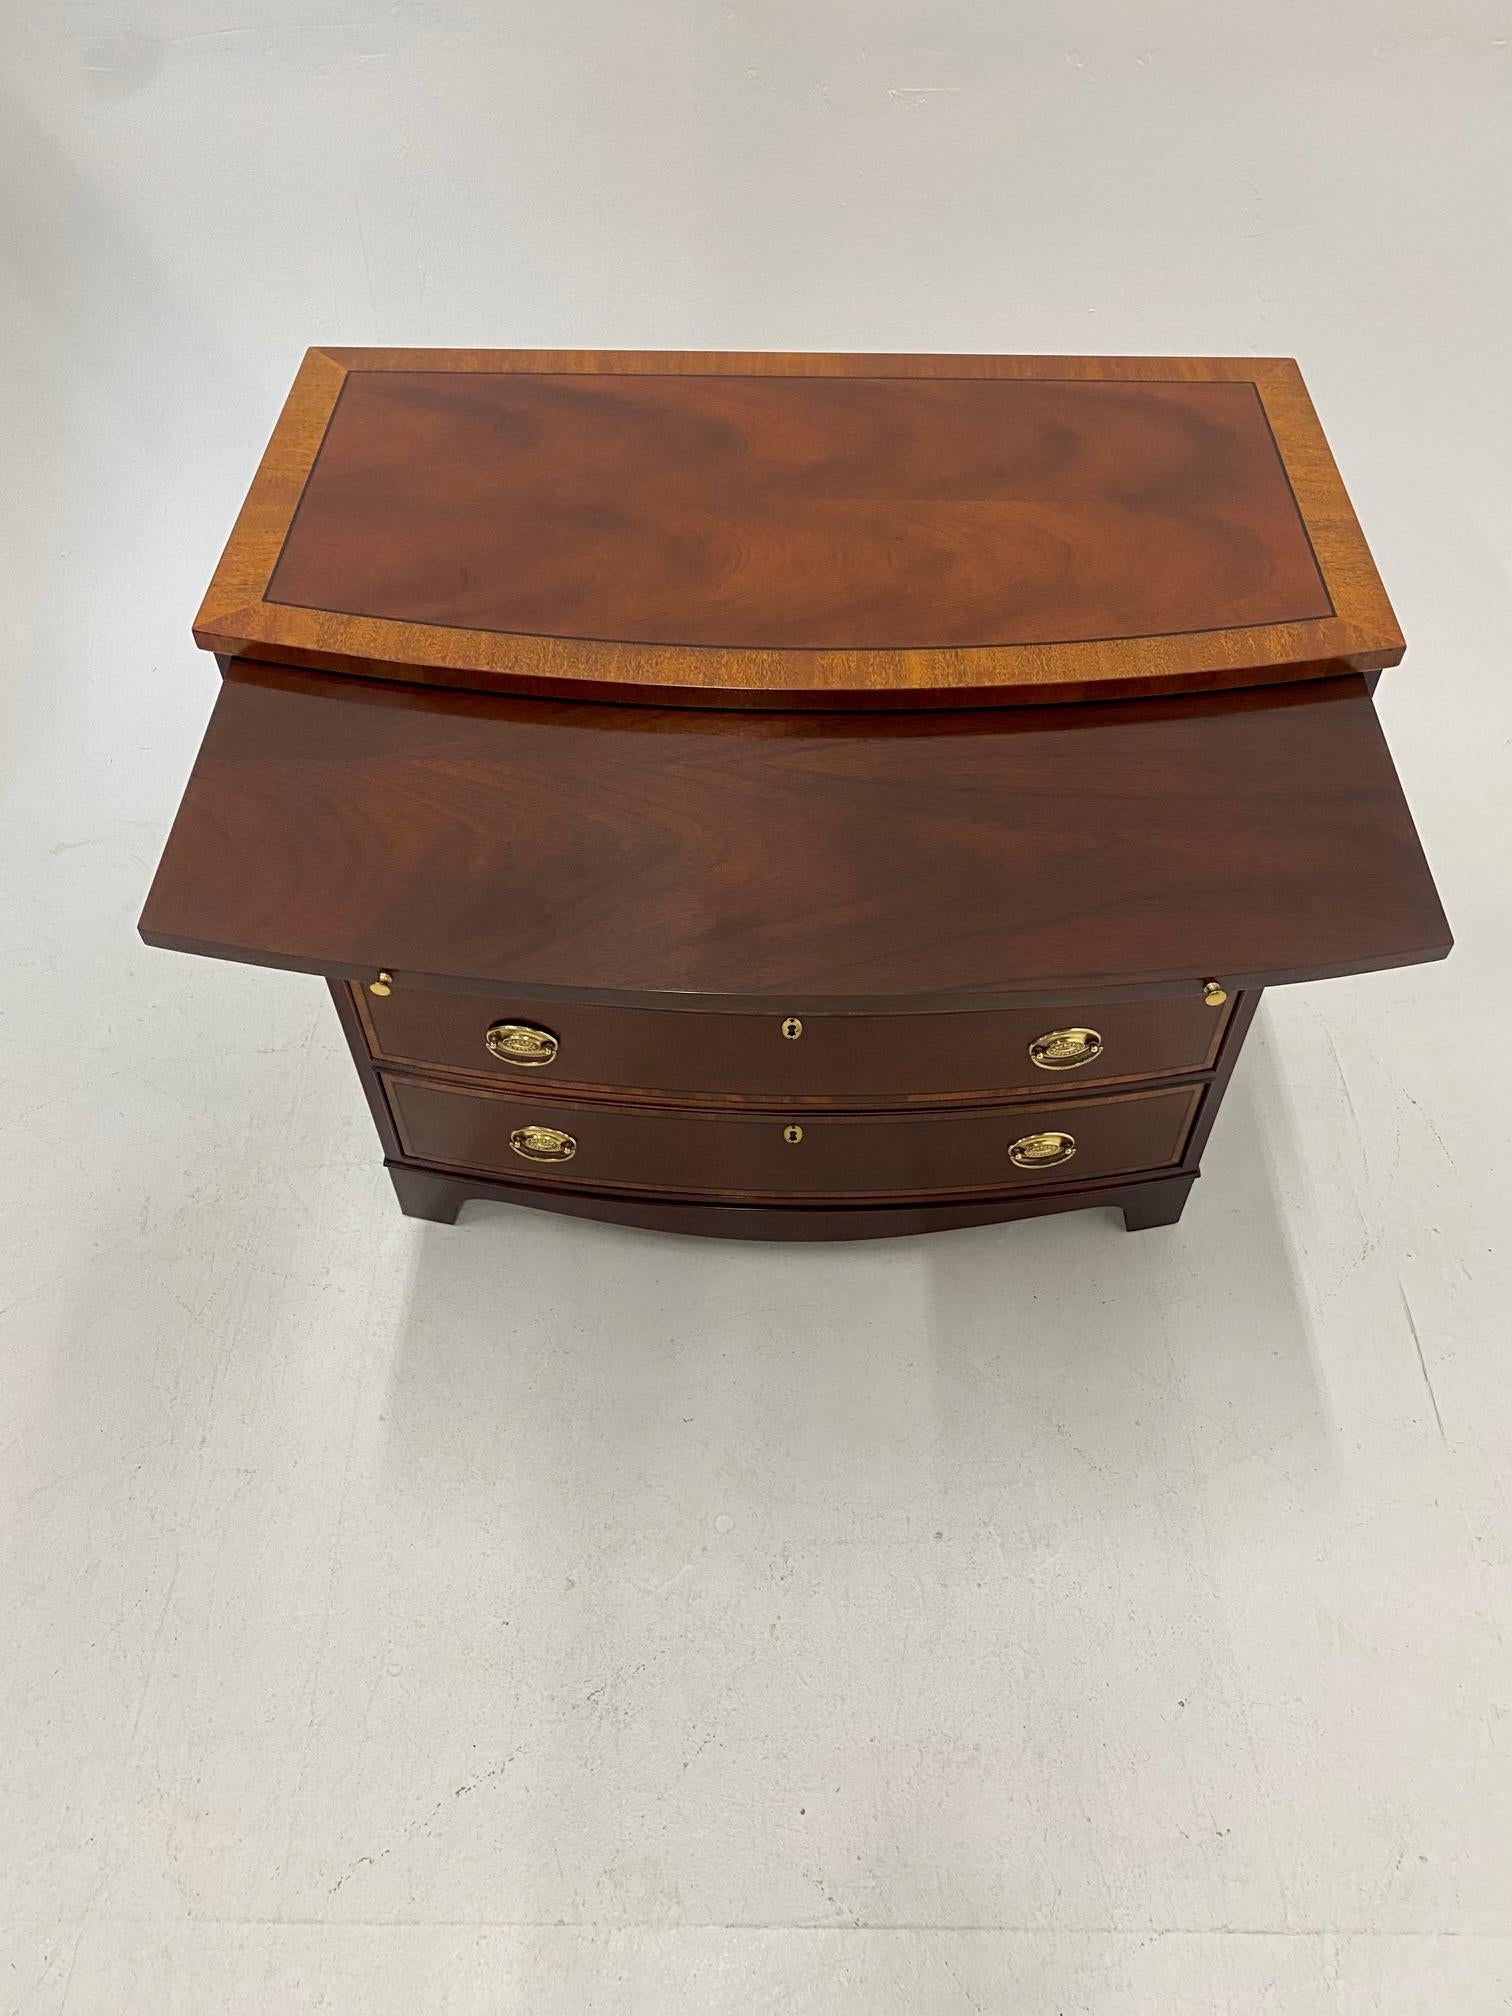 Regency Handsome Bow Front Mahogany and Satinwood Bachelors Chest of Drawers